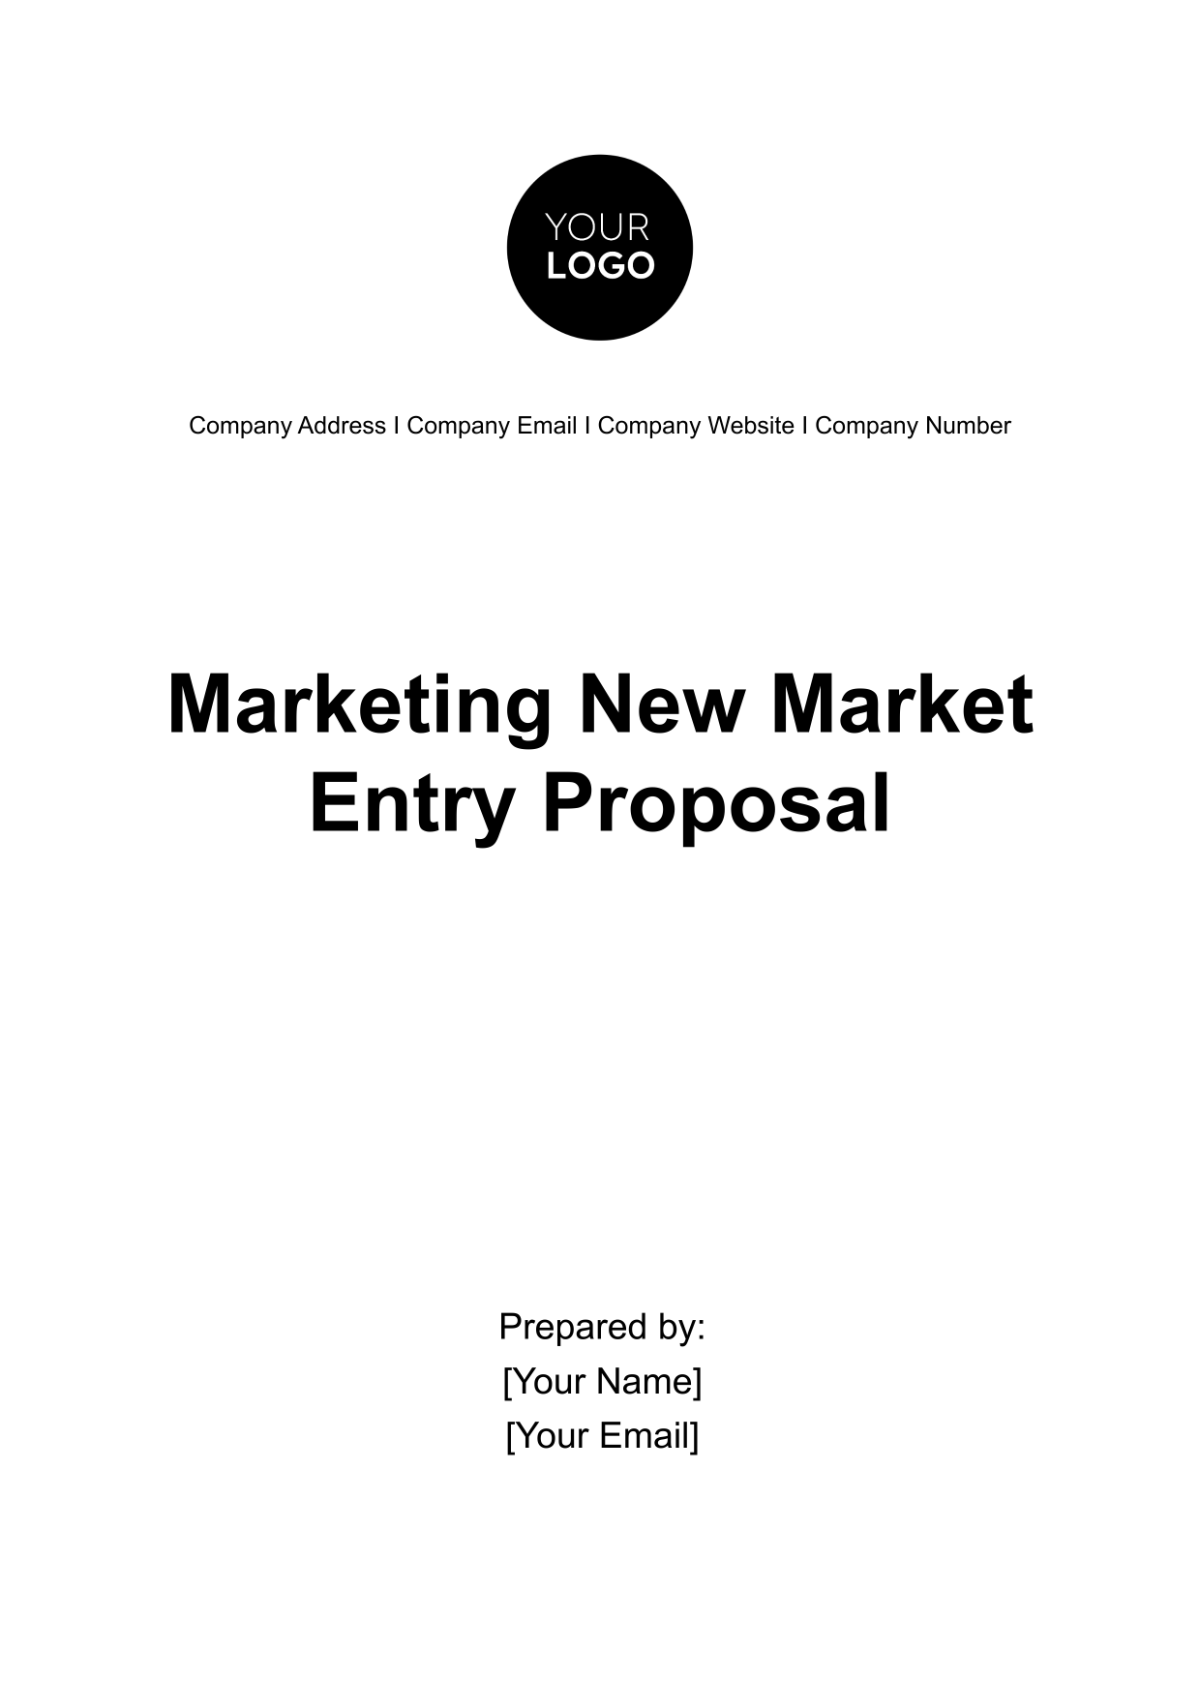 Marketing New Market Entry Proposal Template